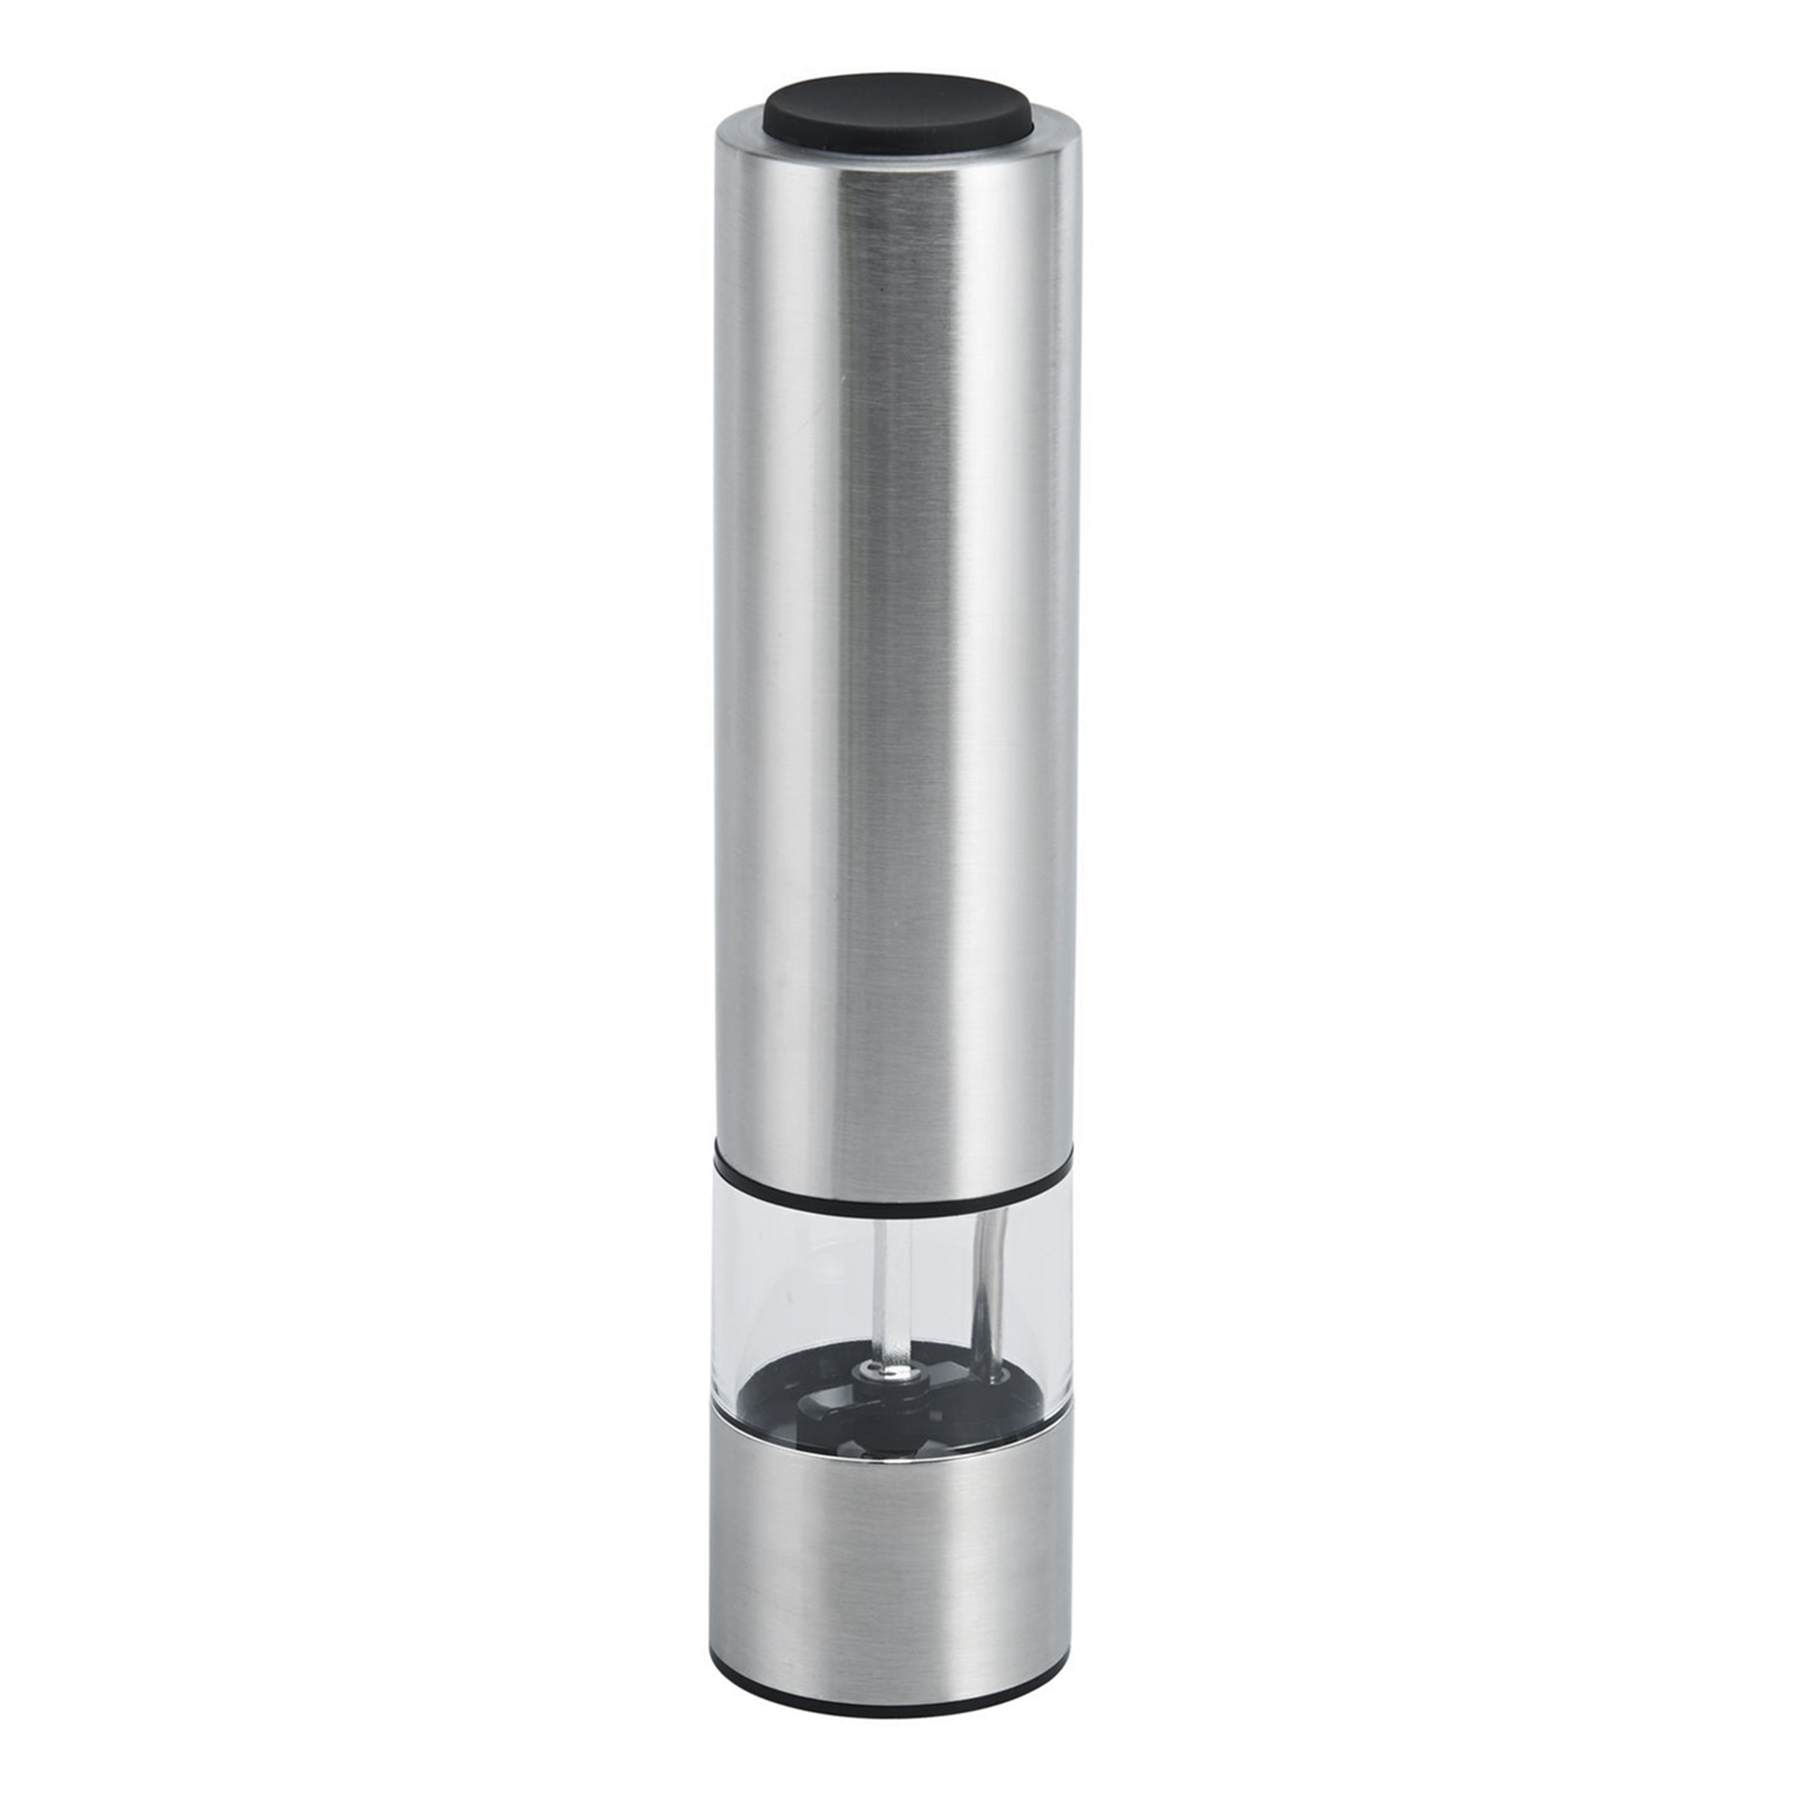 https://www.collectionkitchens.com/wp-content/uploads/2023/03/kam-battery-operated-grinder.jpg